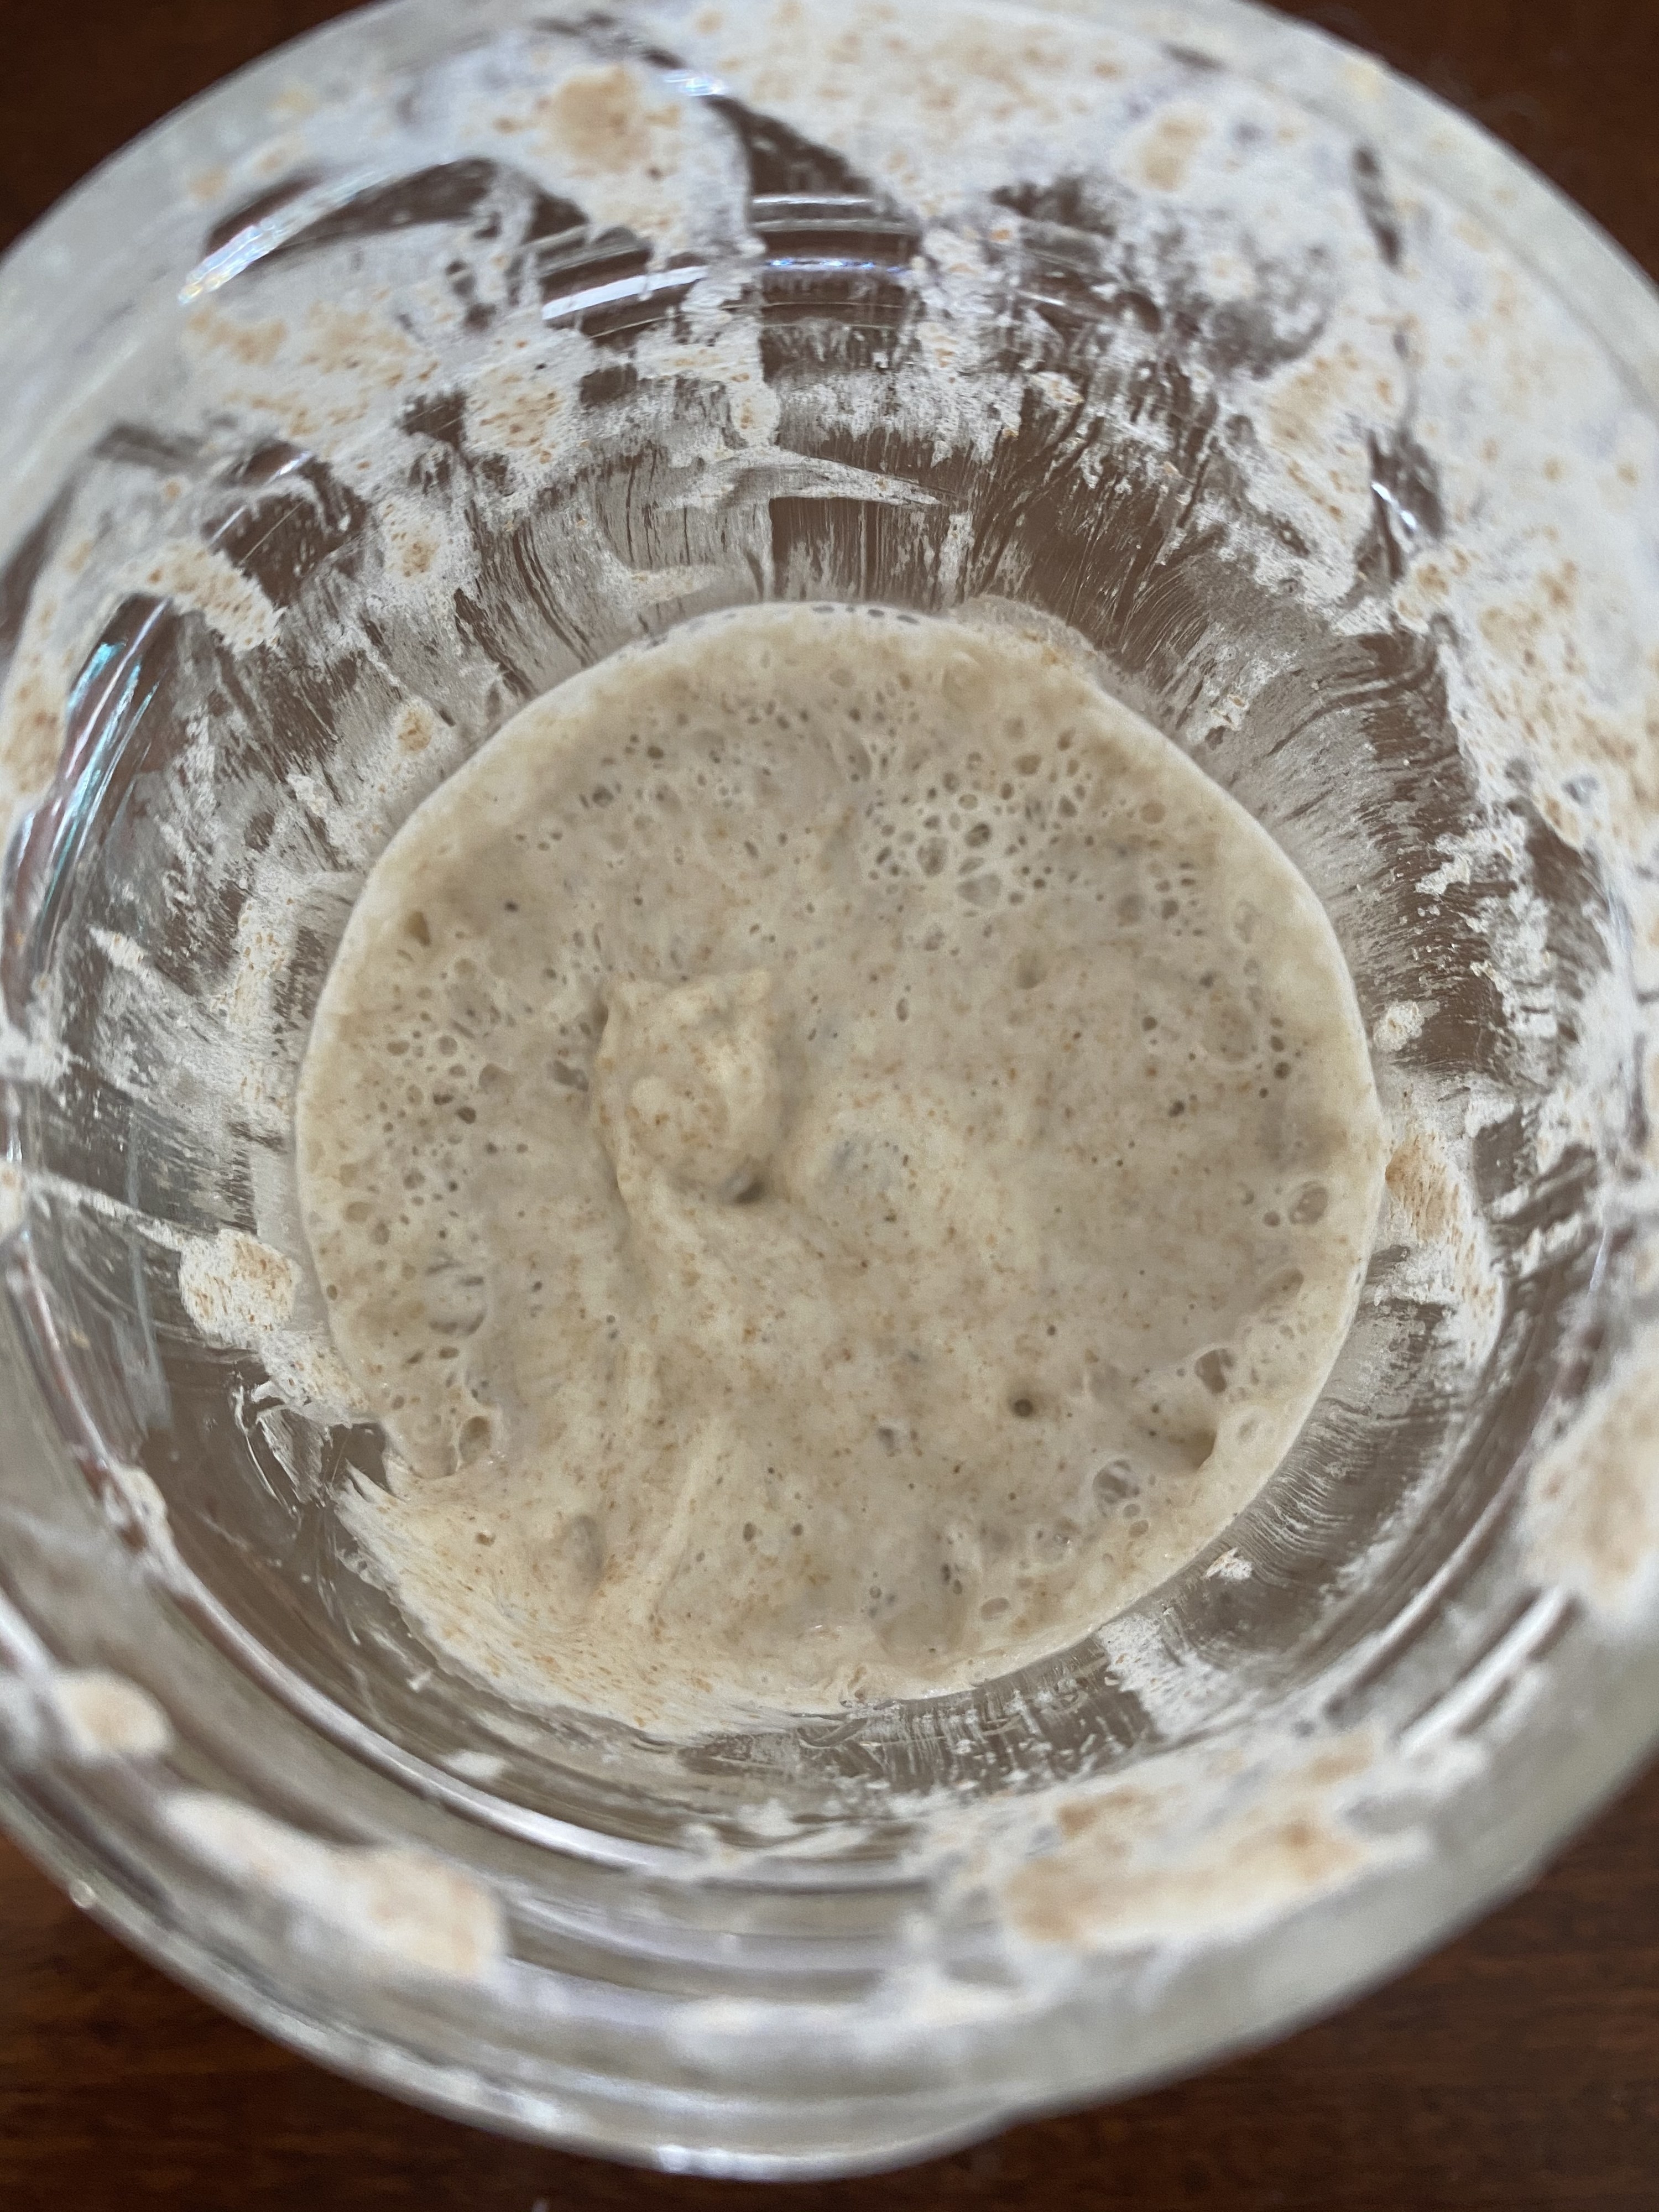 A mature sourdough starter with lots of bubbles on the surface.